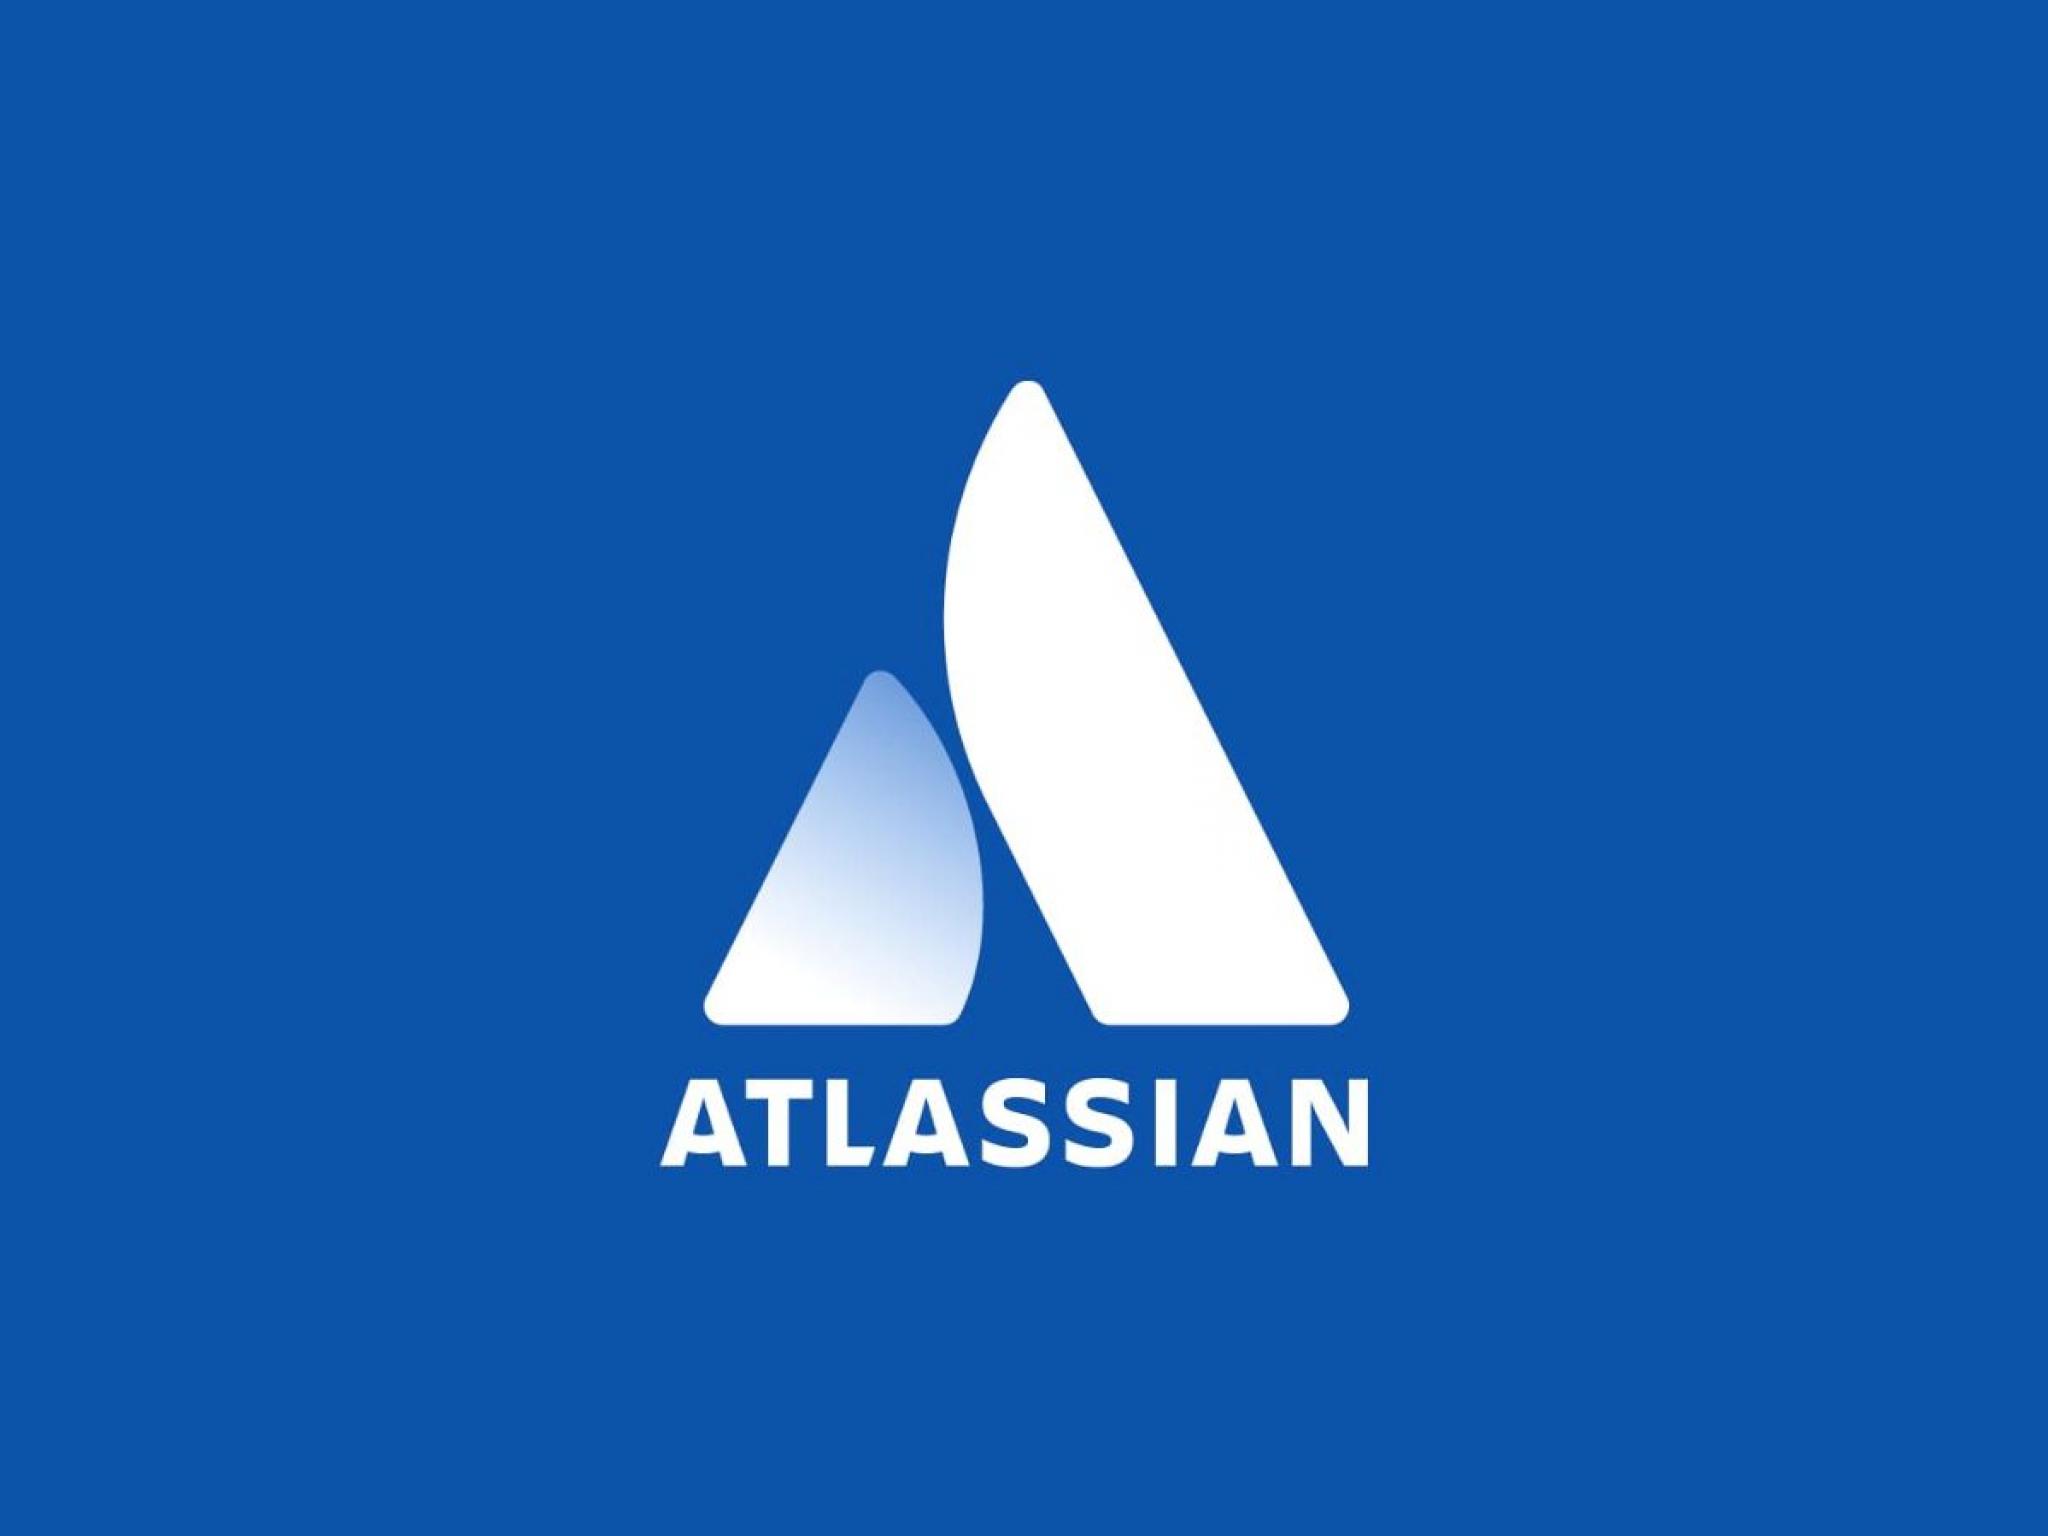  why-atlassian-shares-are-trading-lower-by-10-here-are-other-stocks-moving-in-fridays-mid-day-session 